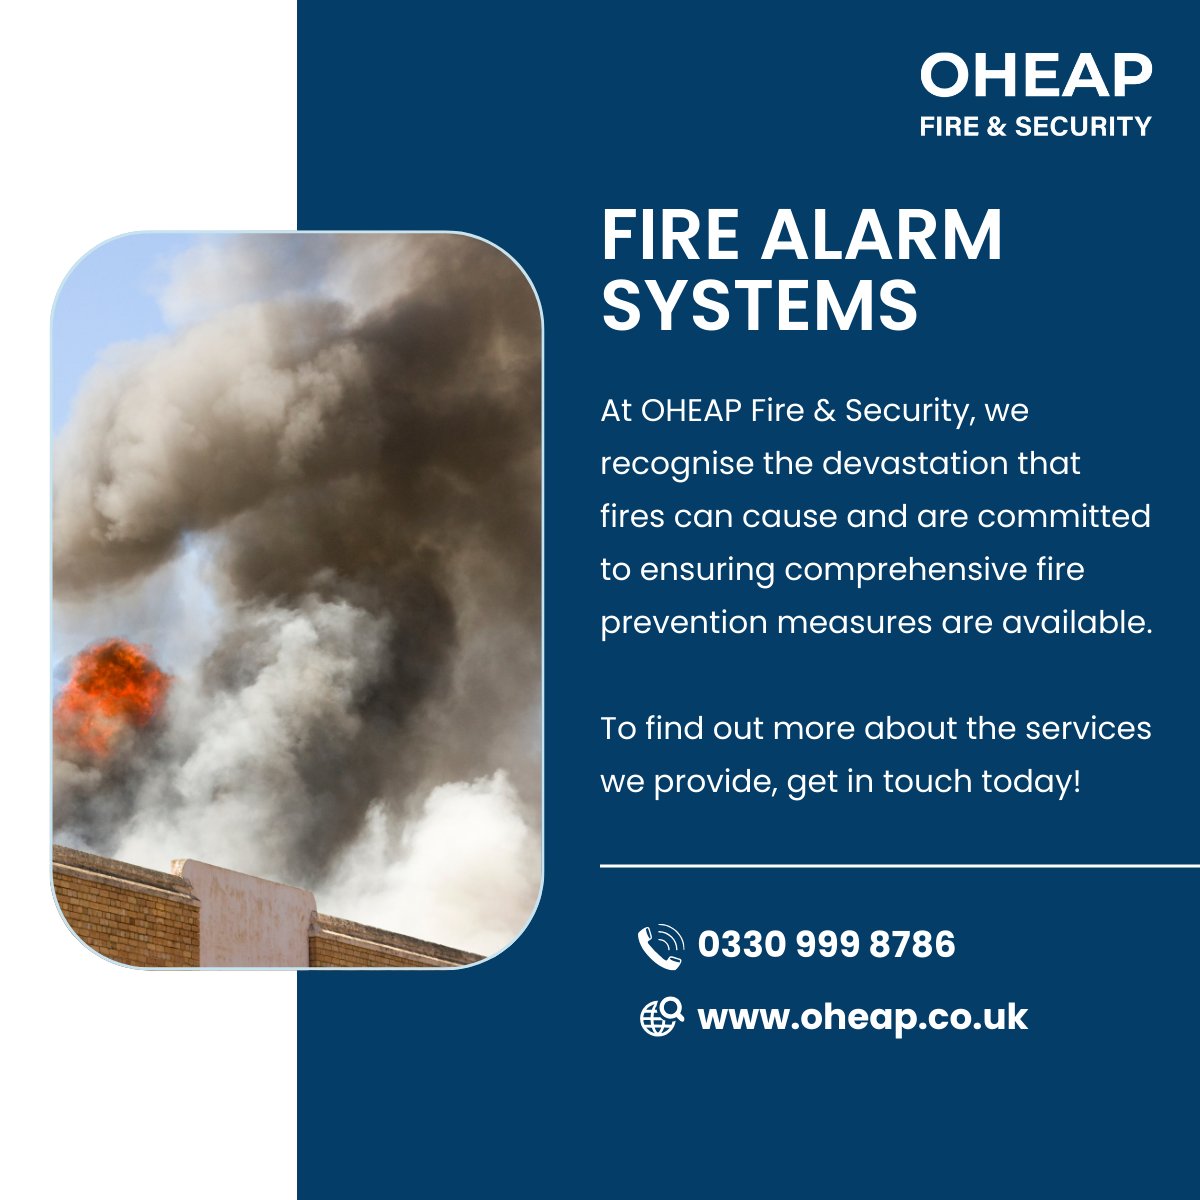 Contact us today to discuss your current fire alarm system requirements and how OHEAP can carry out testing and maintenance: 0330 999 8786
Alternatively, you can also visit our website here: oheap.co.uk/fire-protectio…

#firesafety #awareness #firealarmsystems #fireprevention